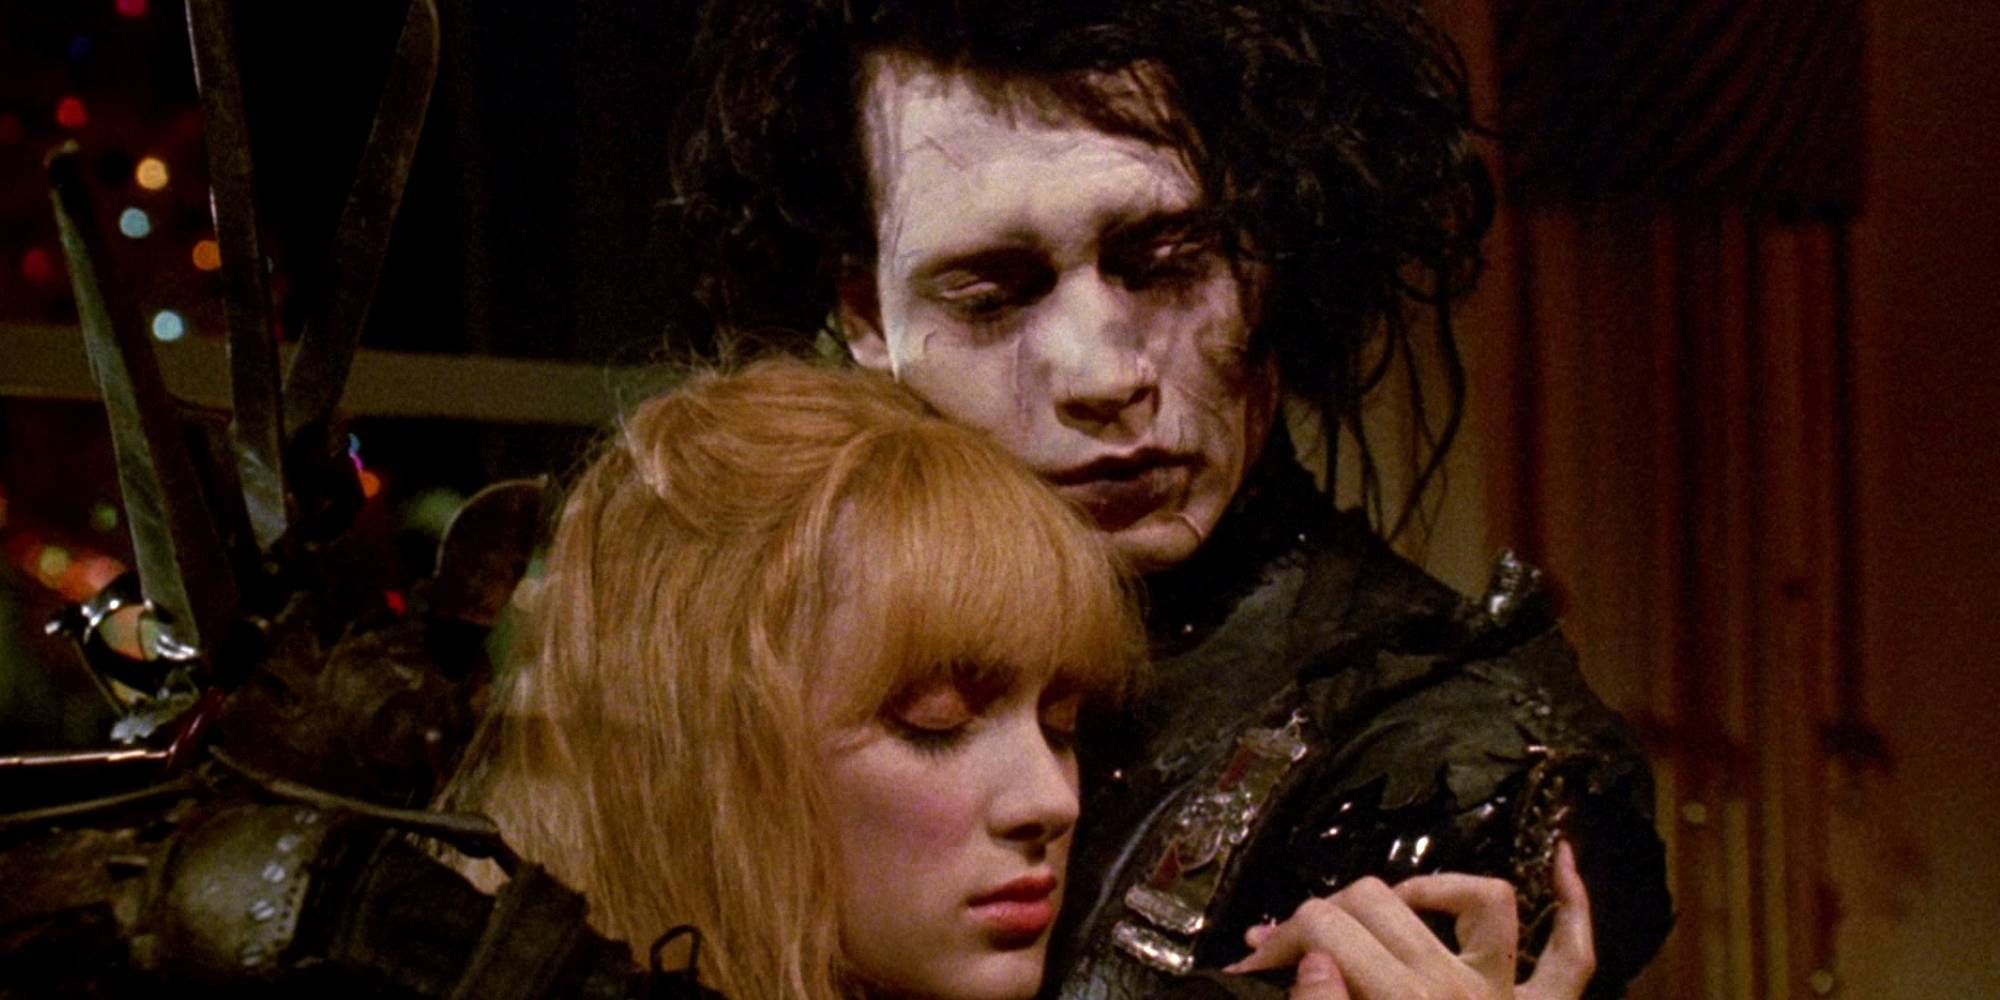 Johnny Depp and WInona Ryder as Kim and Edward in Edward Scissorhands hugging.